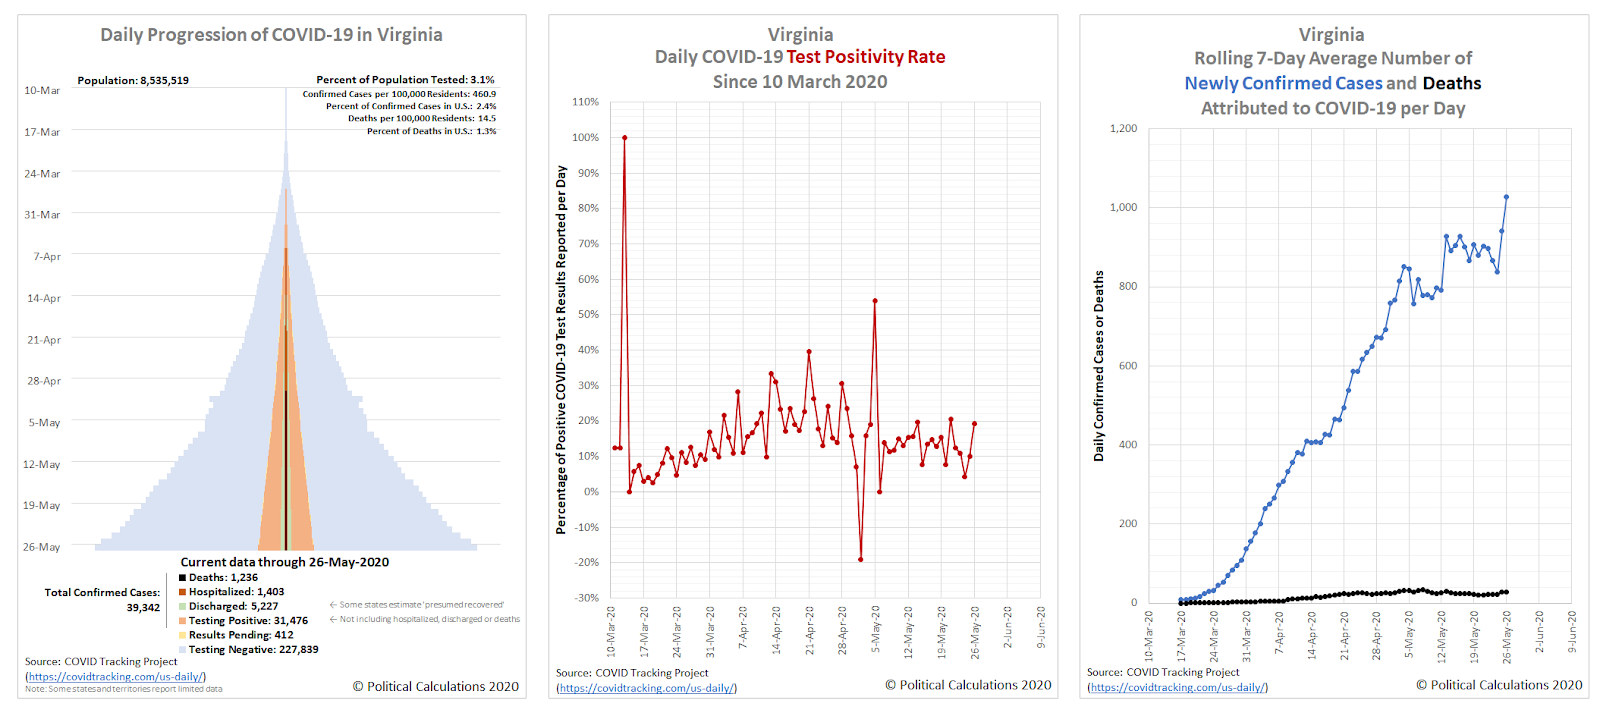 Progression of COVID-19 in Virginia, Daily Test Positivity Rate, 7-Day Total Newly Confirmed Cases and Deaths per Day, 10 March 2020 through 26 May 2020